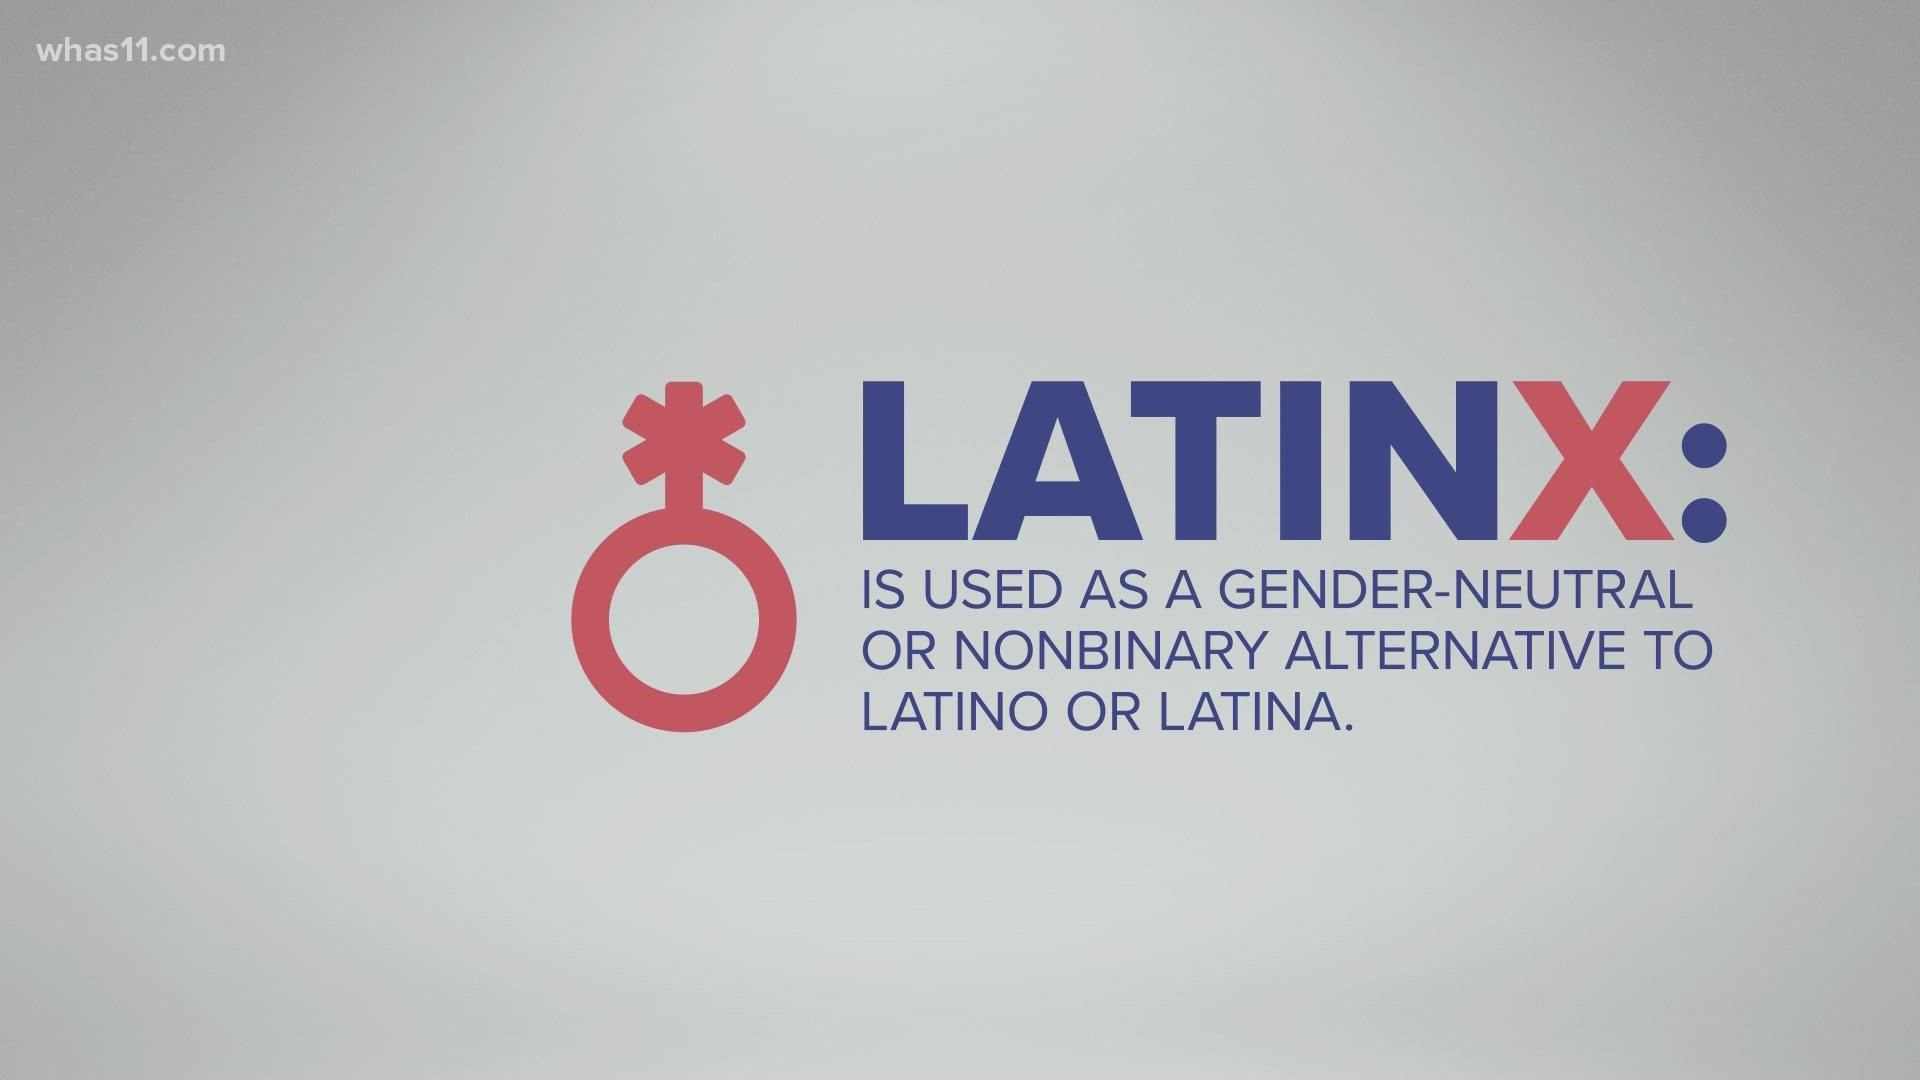 In a recent survey, only 1/3 of people said Latinx should be used for the Latin population as a whole.